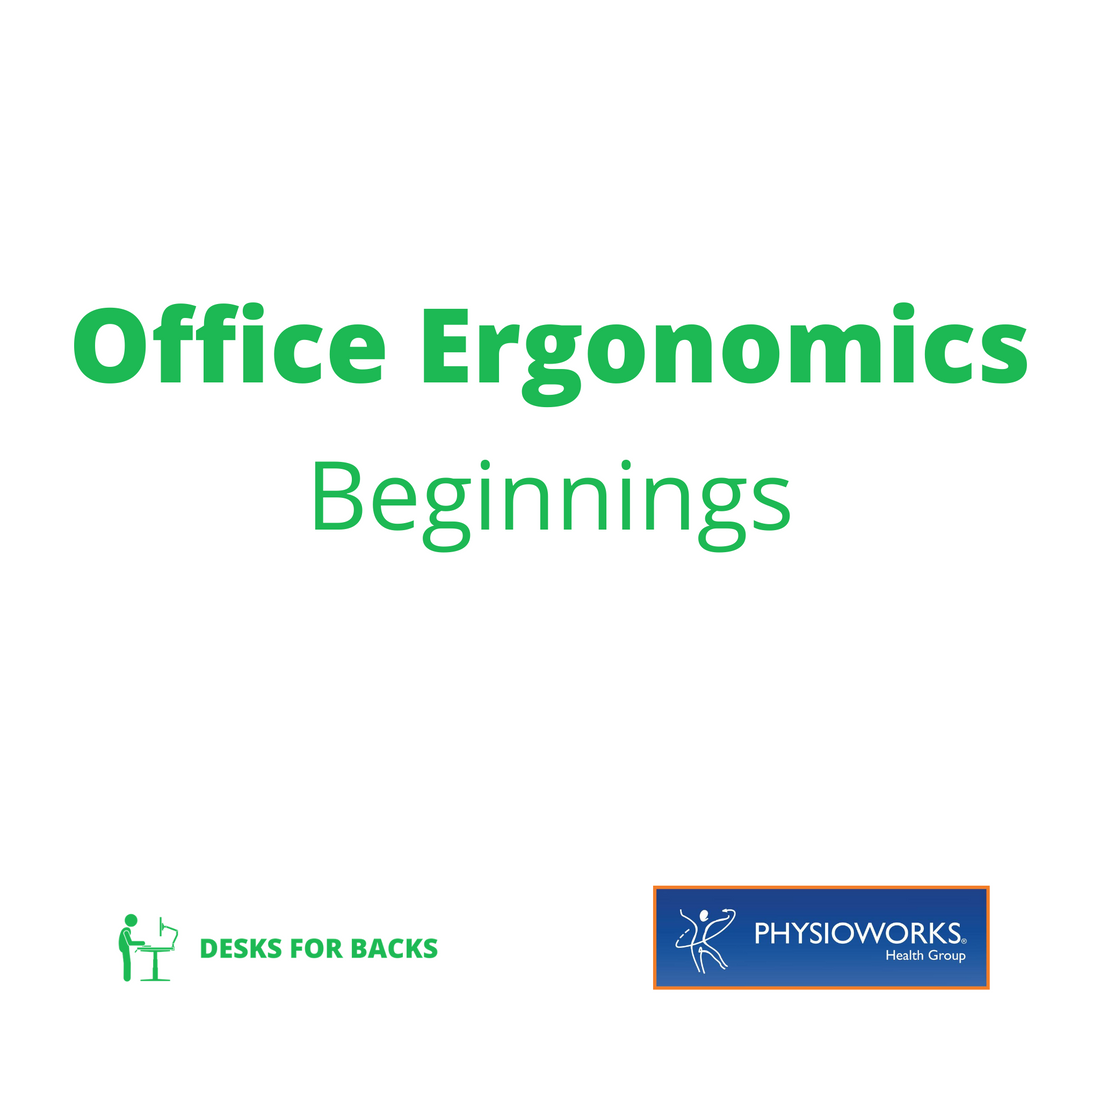 Office ergonomics: Beginnings with Physioworks Health Group